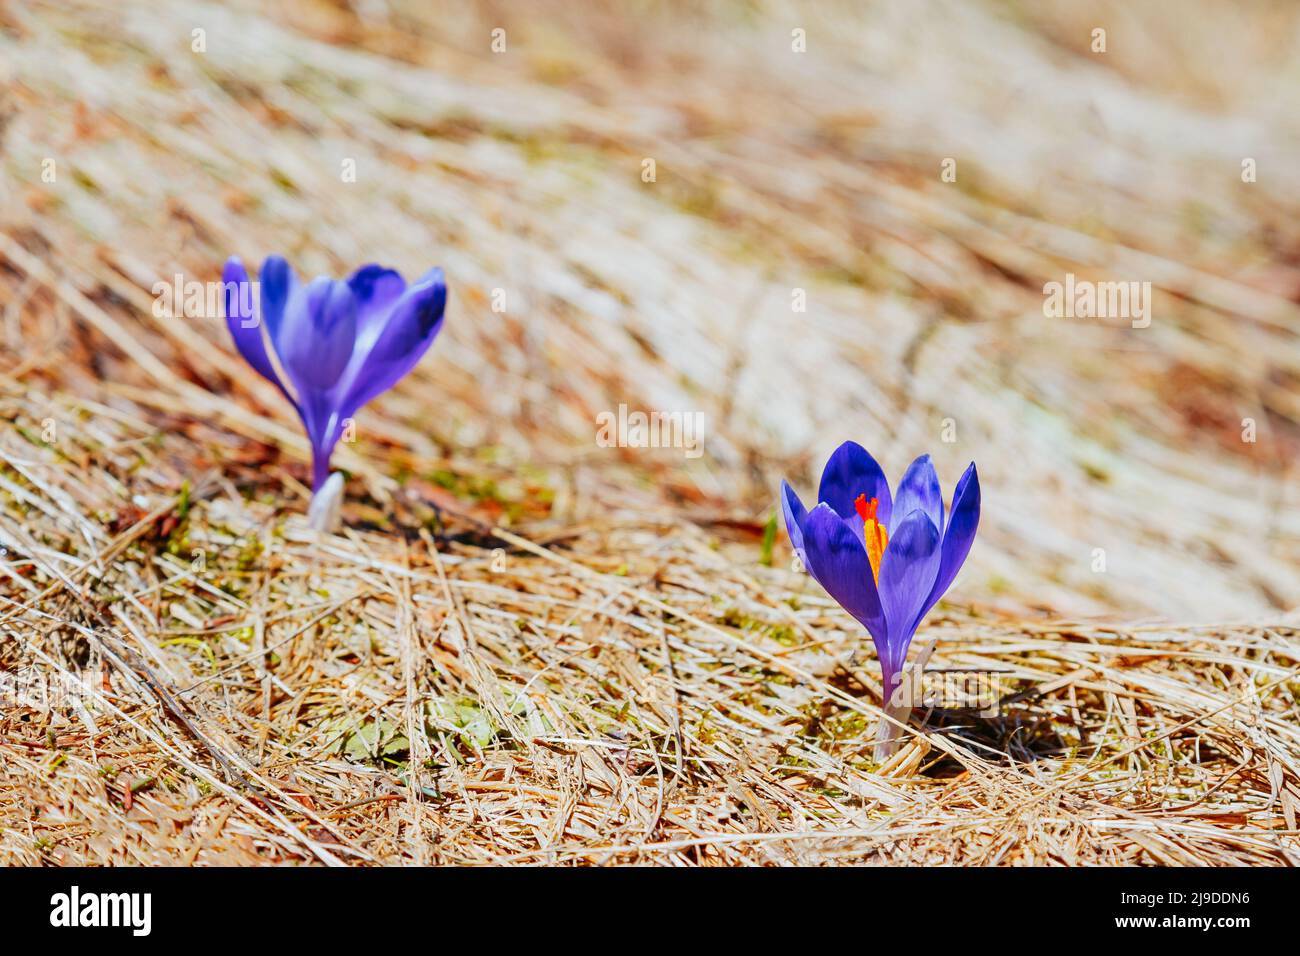 Stunning first flowers in the dry yellow grass. Gorgeous day and picturesque scene. Location place of Ukraine Europe. Wonderful wallpaper. Closeup com Stock Photo